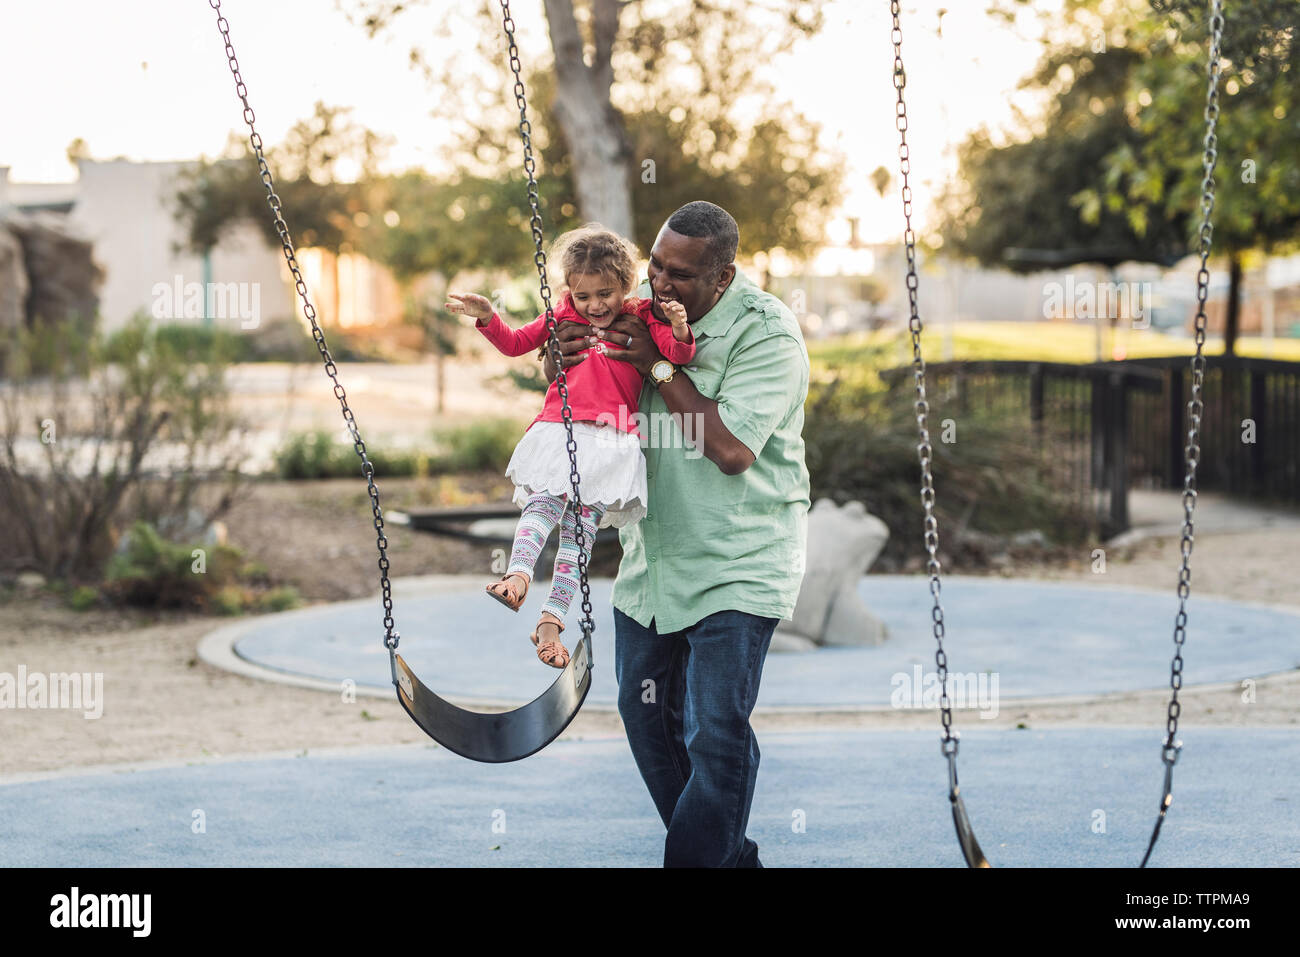 Playful father picking up daughter from swing while playing at playground Stock Photo